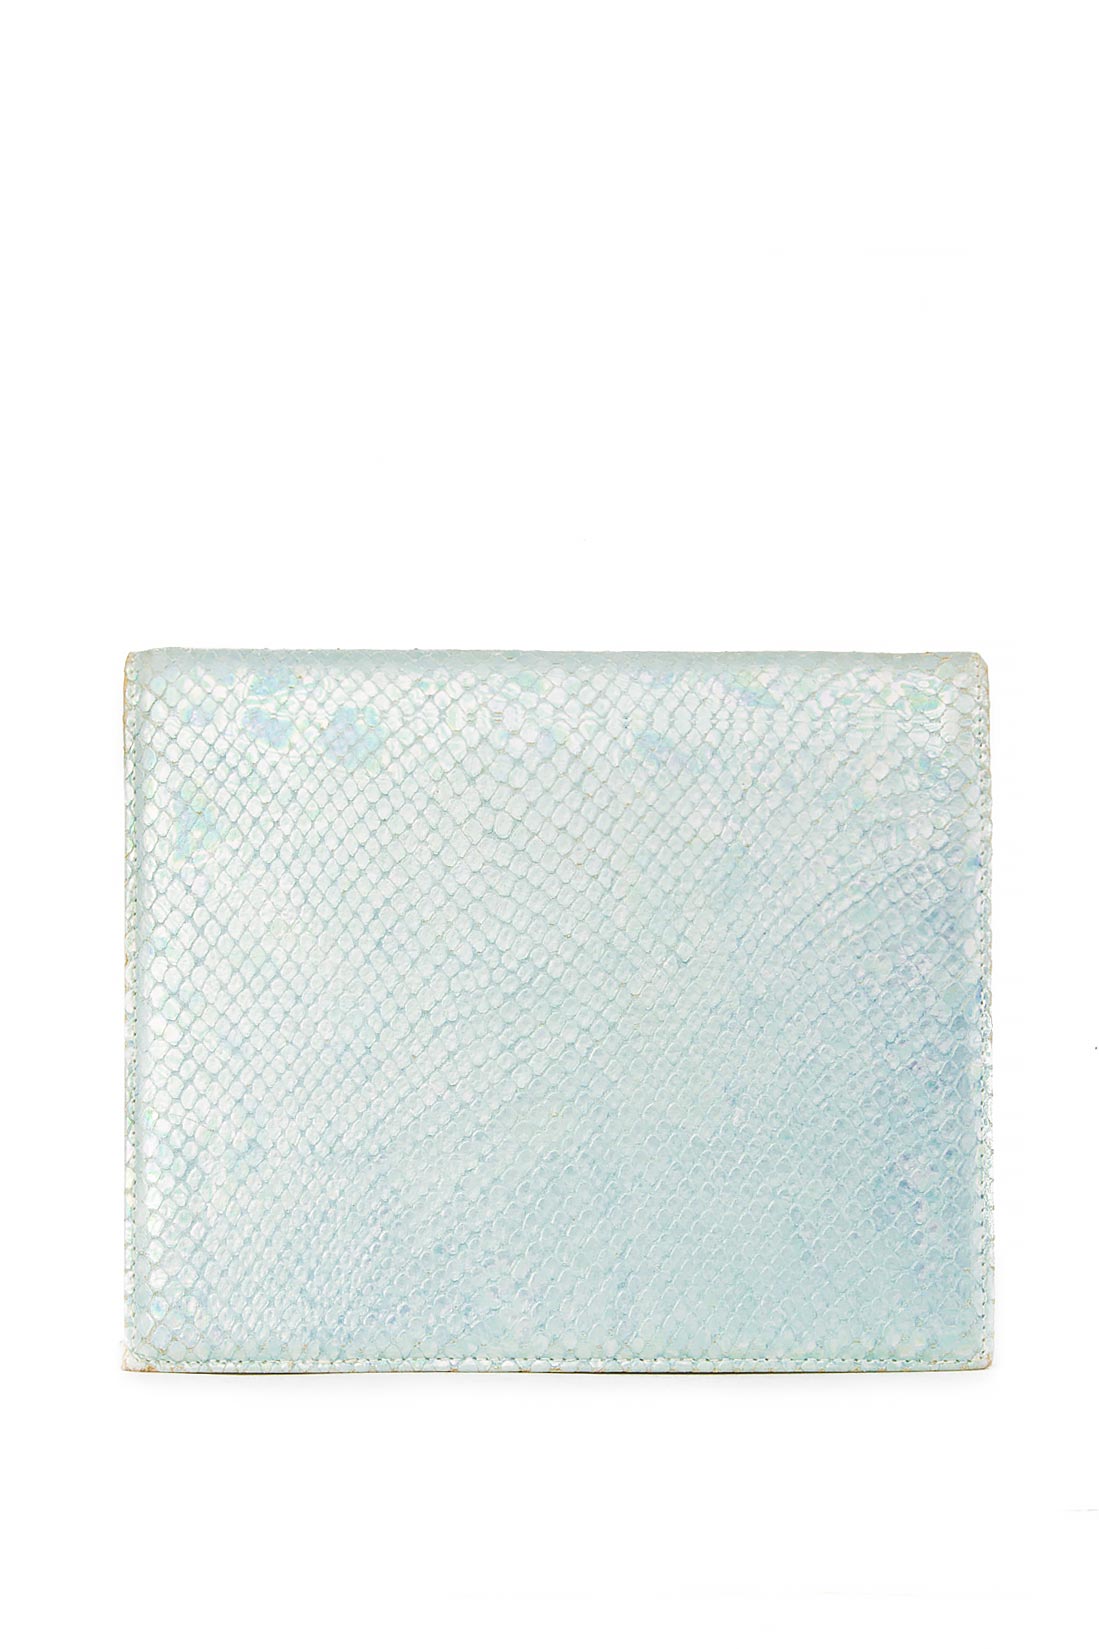 Textured-leather clutch embossed with metallic mirrors Mihai Albu image 2